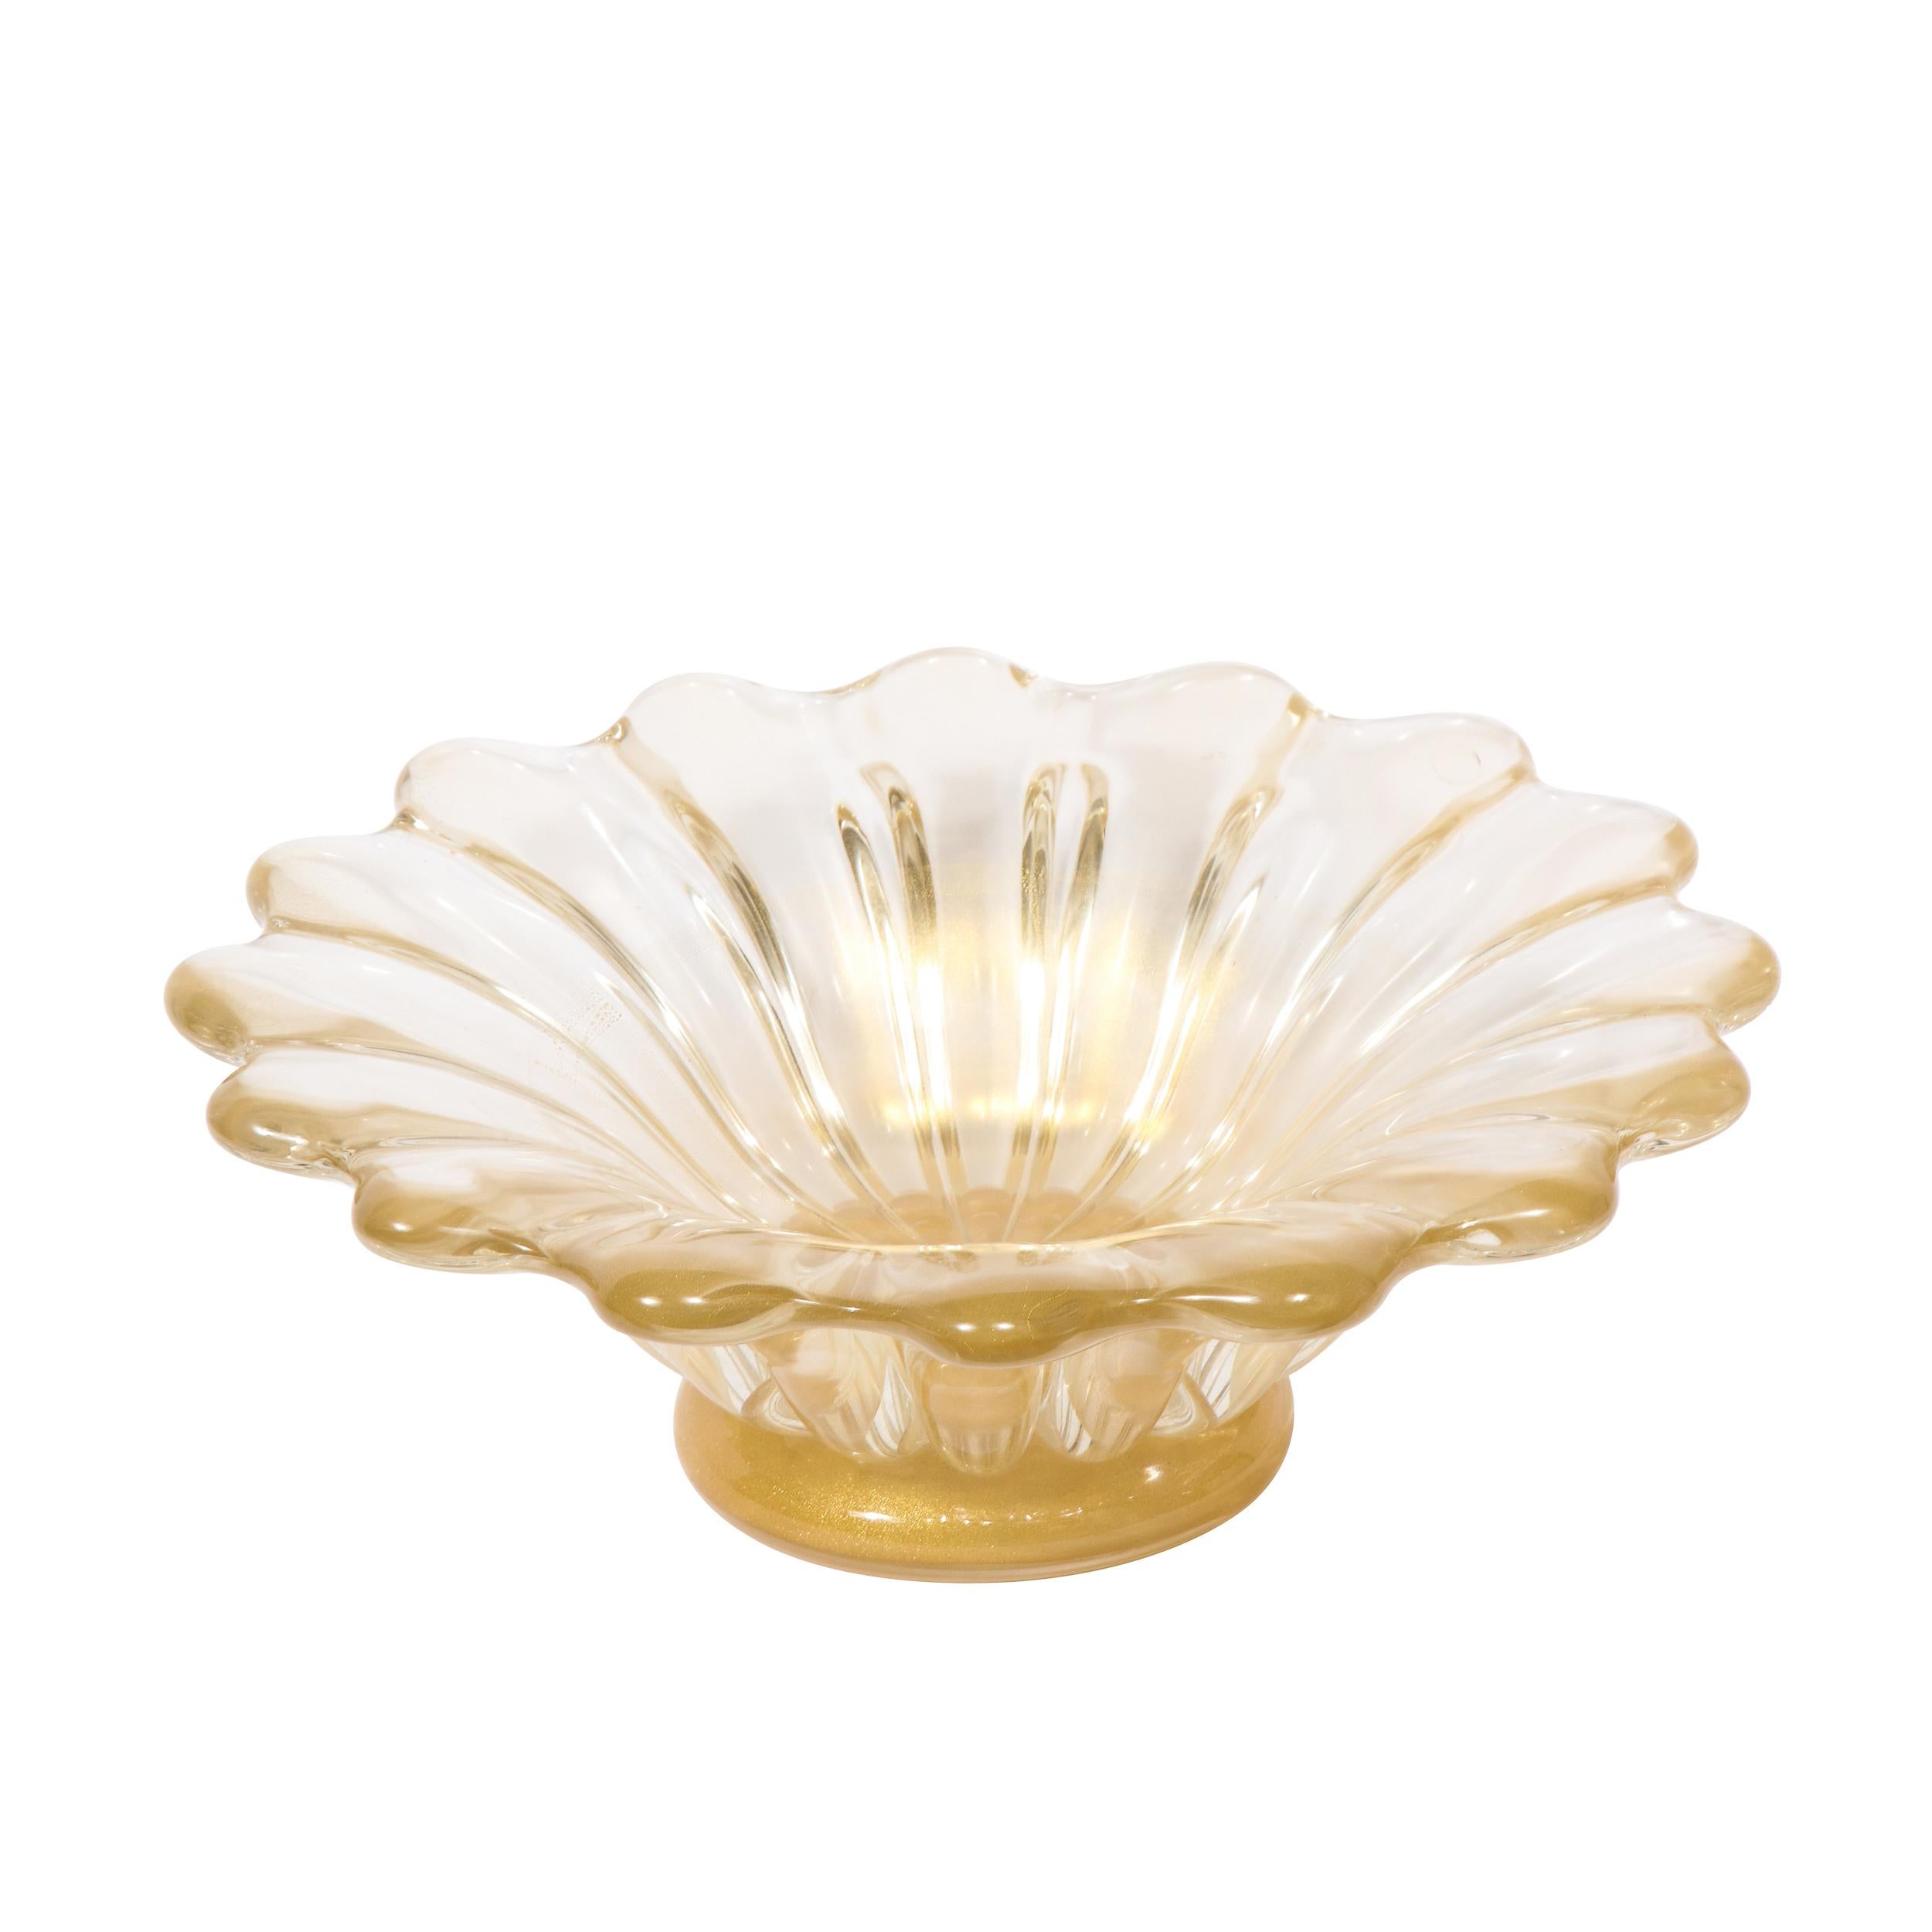 This elegant Mid-Century Modern bowl was realized in Murano, Italy- the island off the coast of Venice renowned for centuries for its superlative glass production- circa 1950. It features a graphic silhouette with a scalloped border in translucent